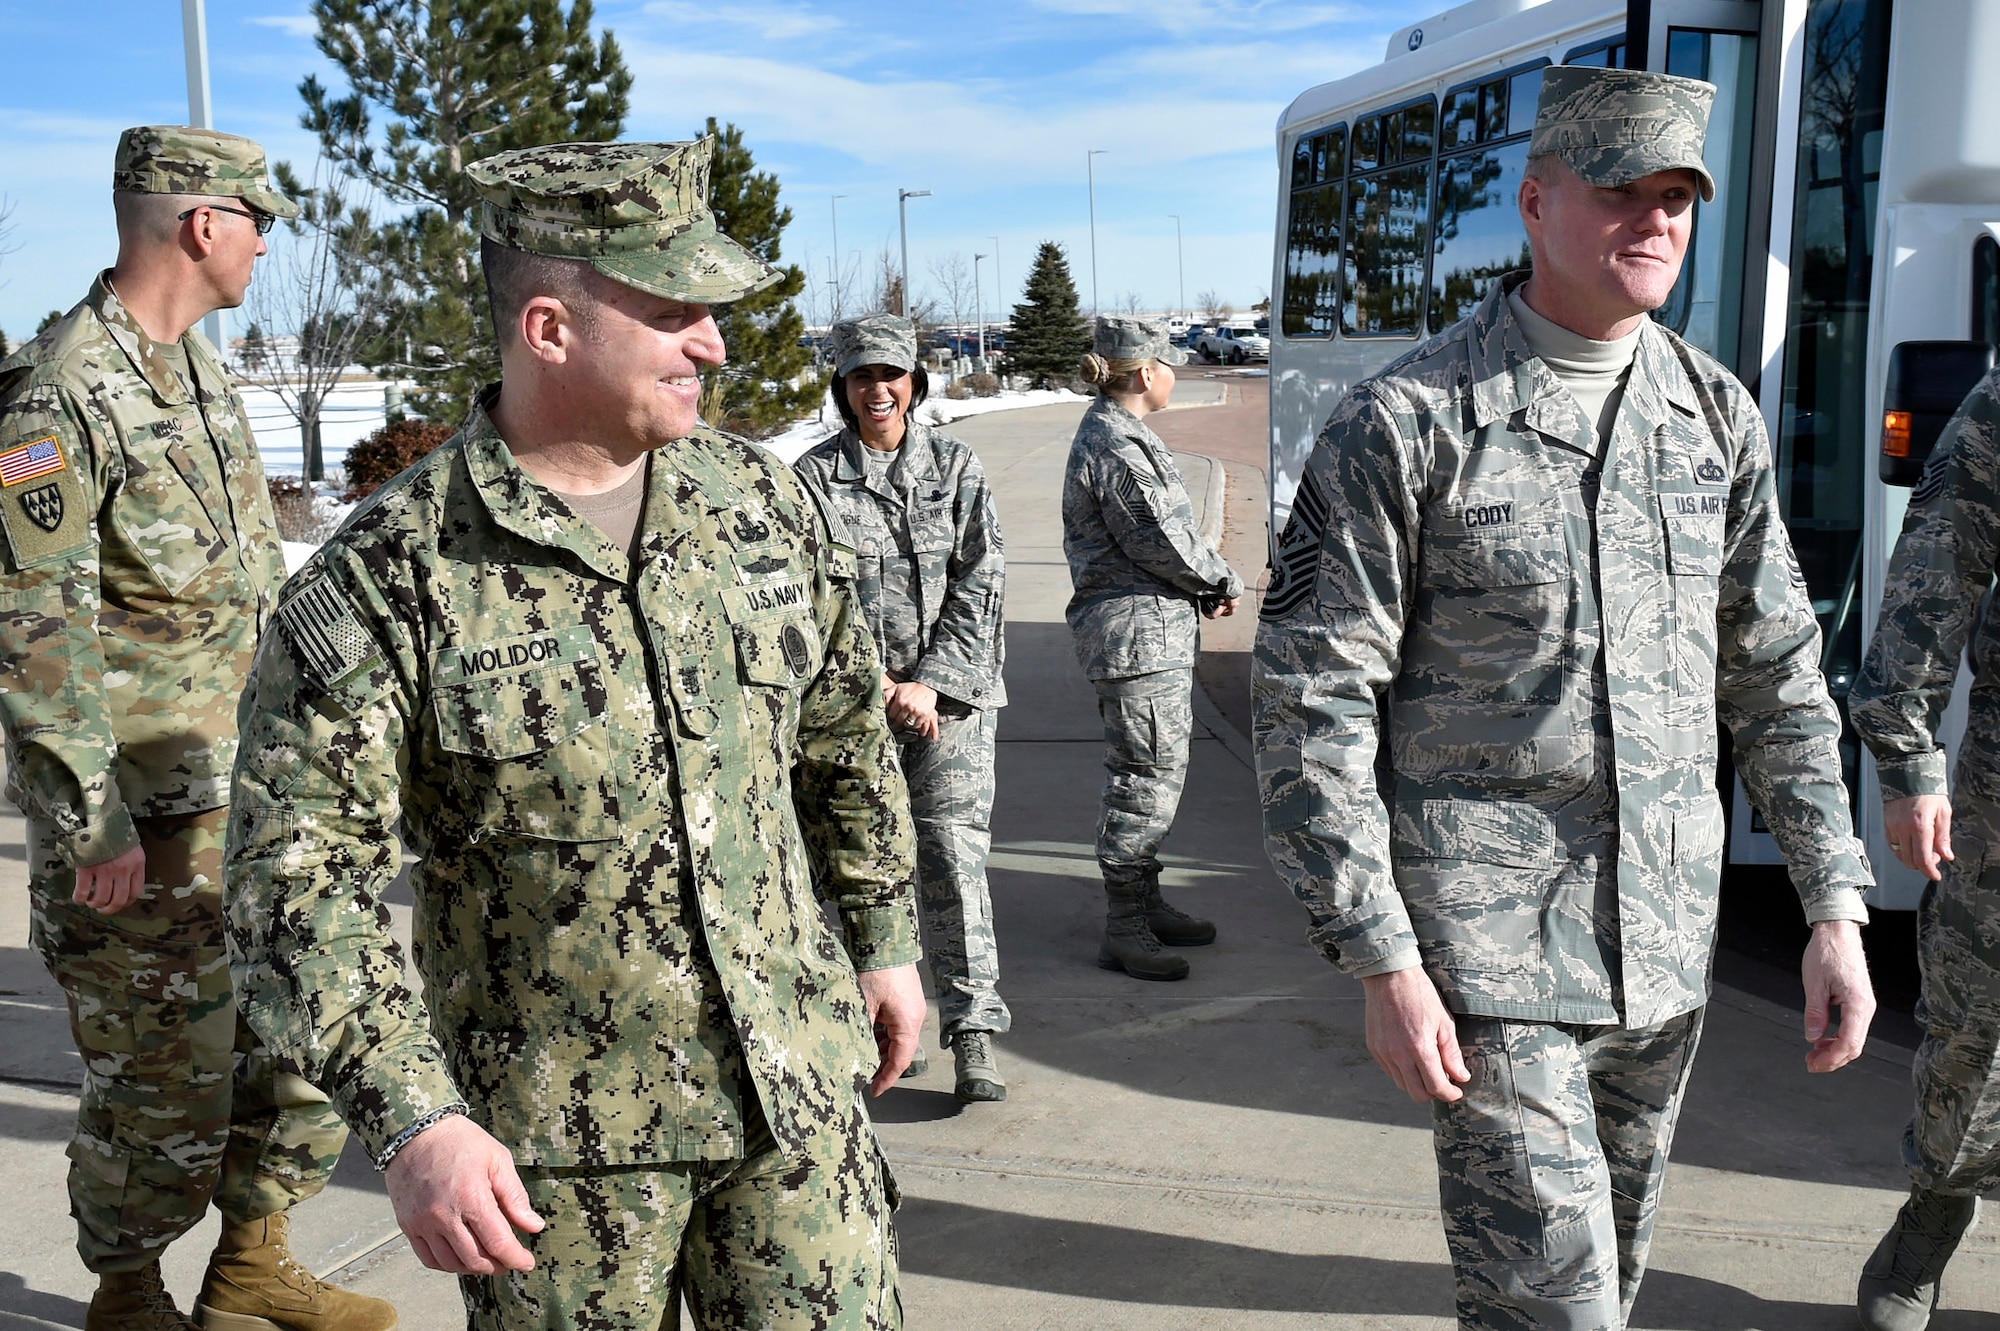 Chief Master Sgt. of the Air Force James A. Cody, right, is greeted by Fleet Master Chief Terrence Molidor, the command senior enlisted advisor for the North American Air Defense Command and U.S. Northern Command, Feb. 11, 2016, at Peterson Air Force Base, Colo. Cody toured the commands’ facility, met with senior enlisted members and recognized several enlisted service members for excellence. (U.S. Air Force Photo/Master Sgt. Andy Bellamy)